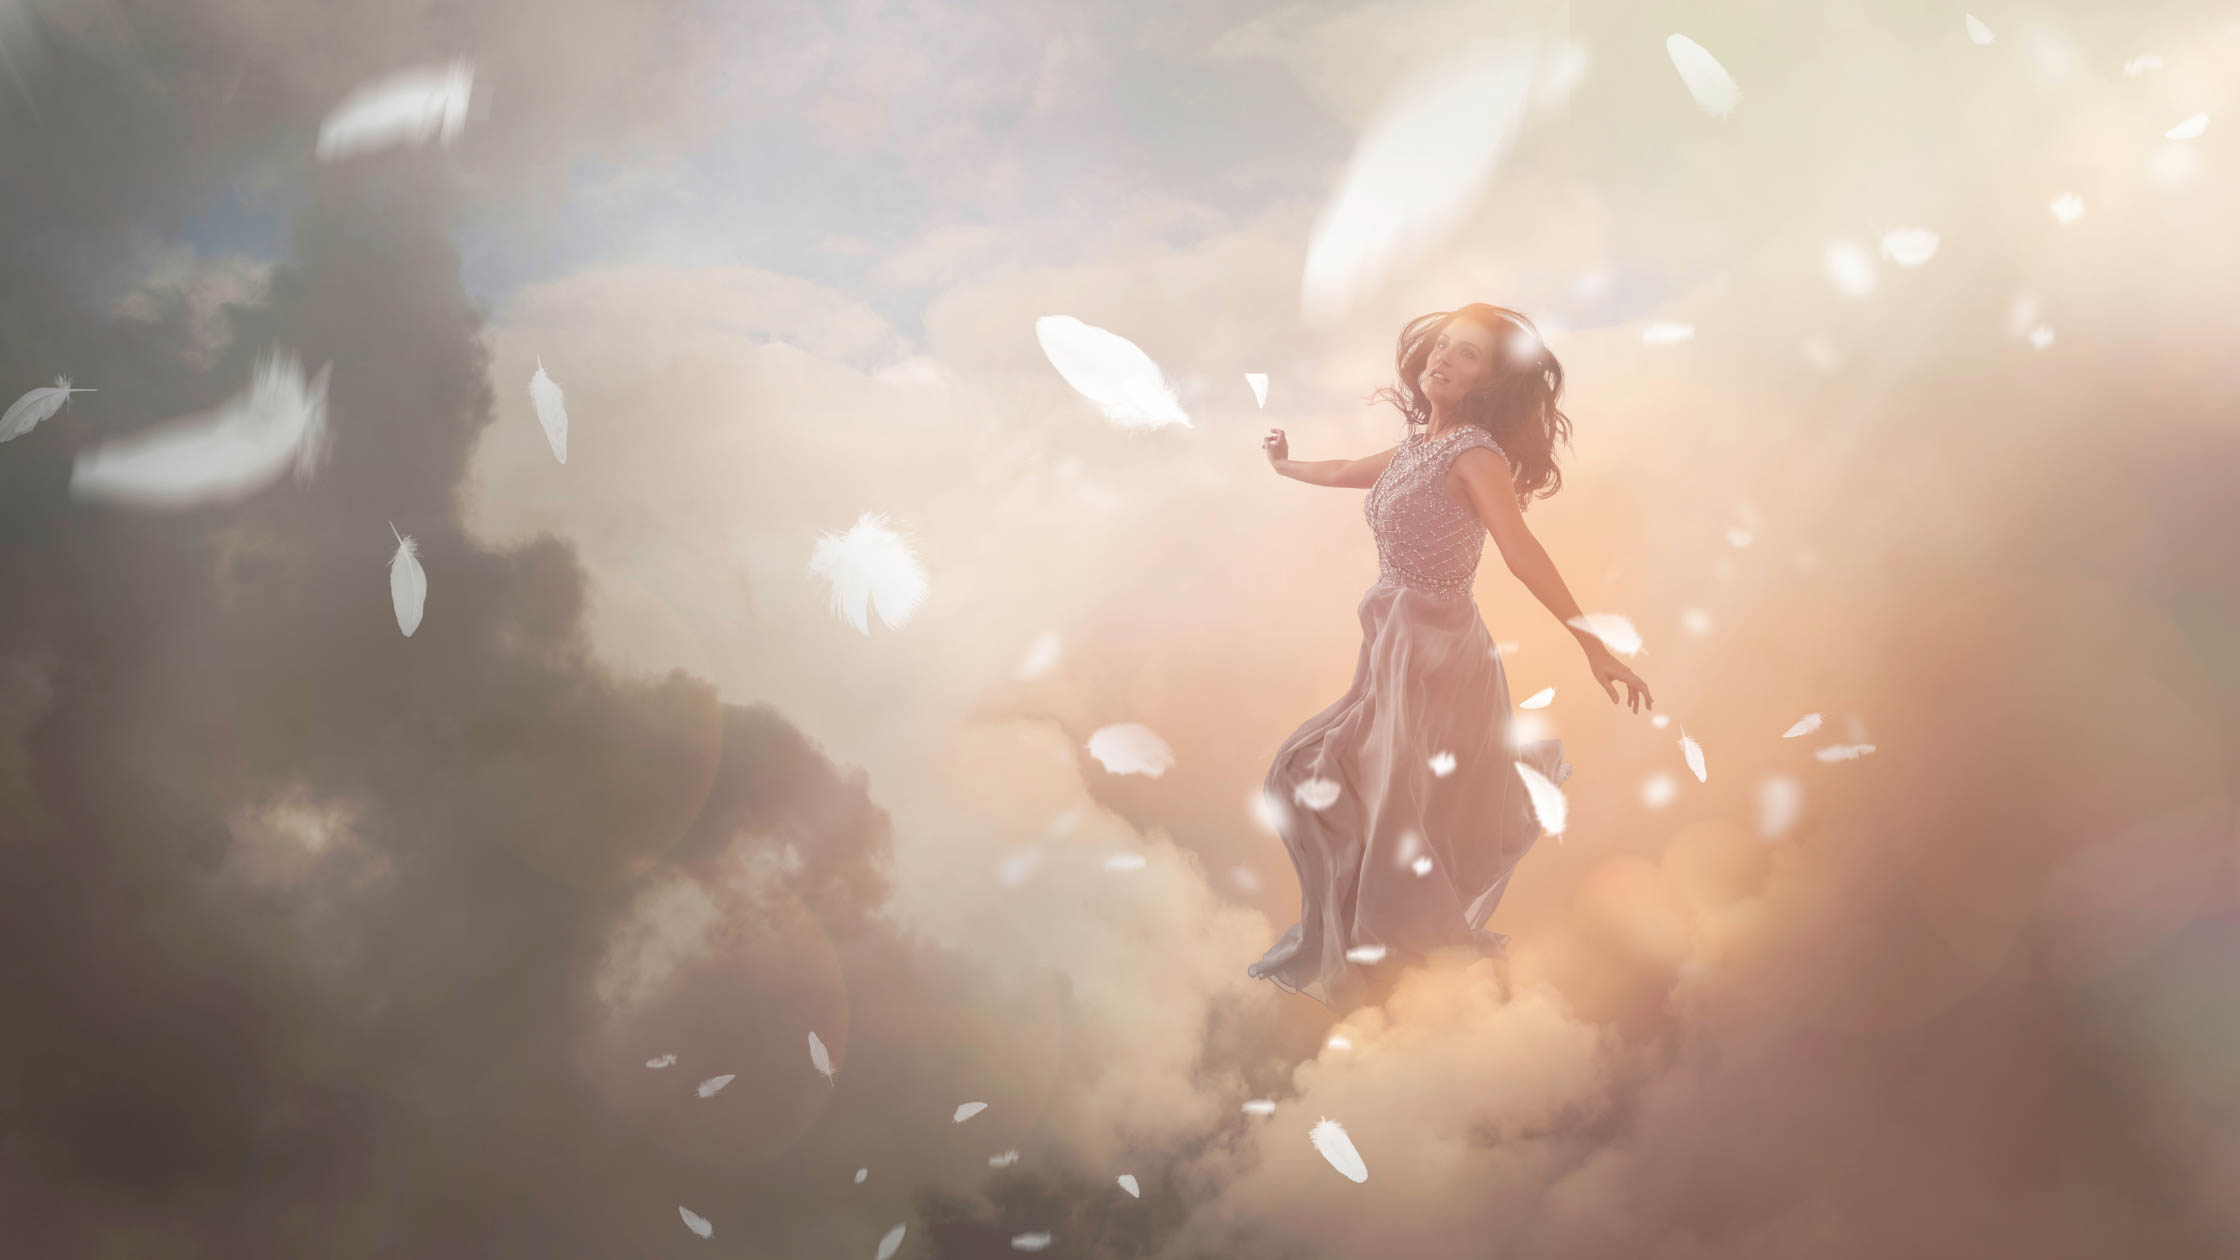 A beautiful woman floating in clouds with feathers falling around her.